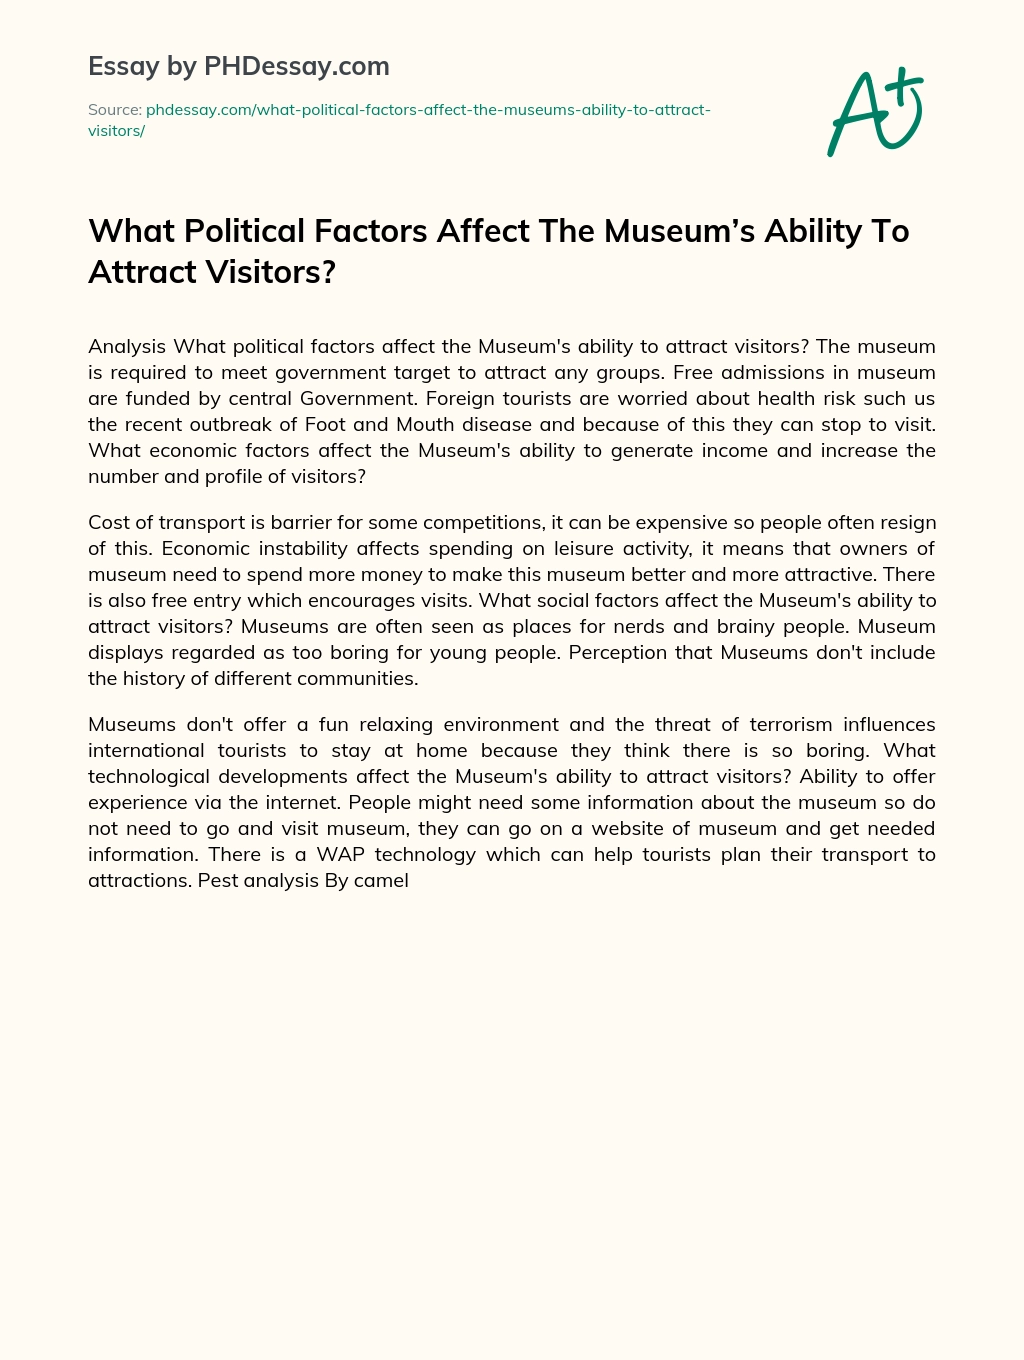 What Political Factors Affect The Museum’s Ability To Attract Visitors? essay